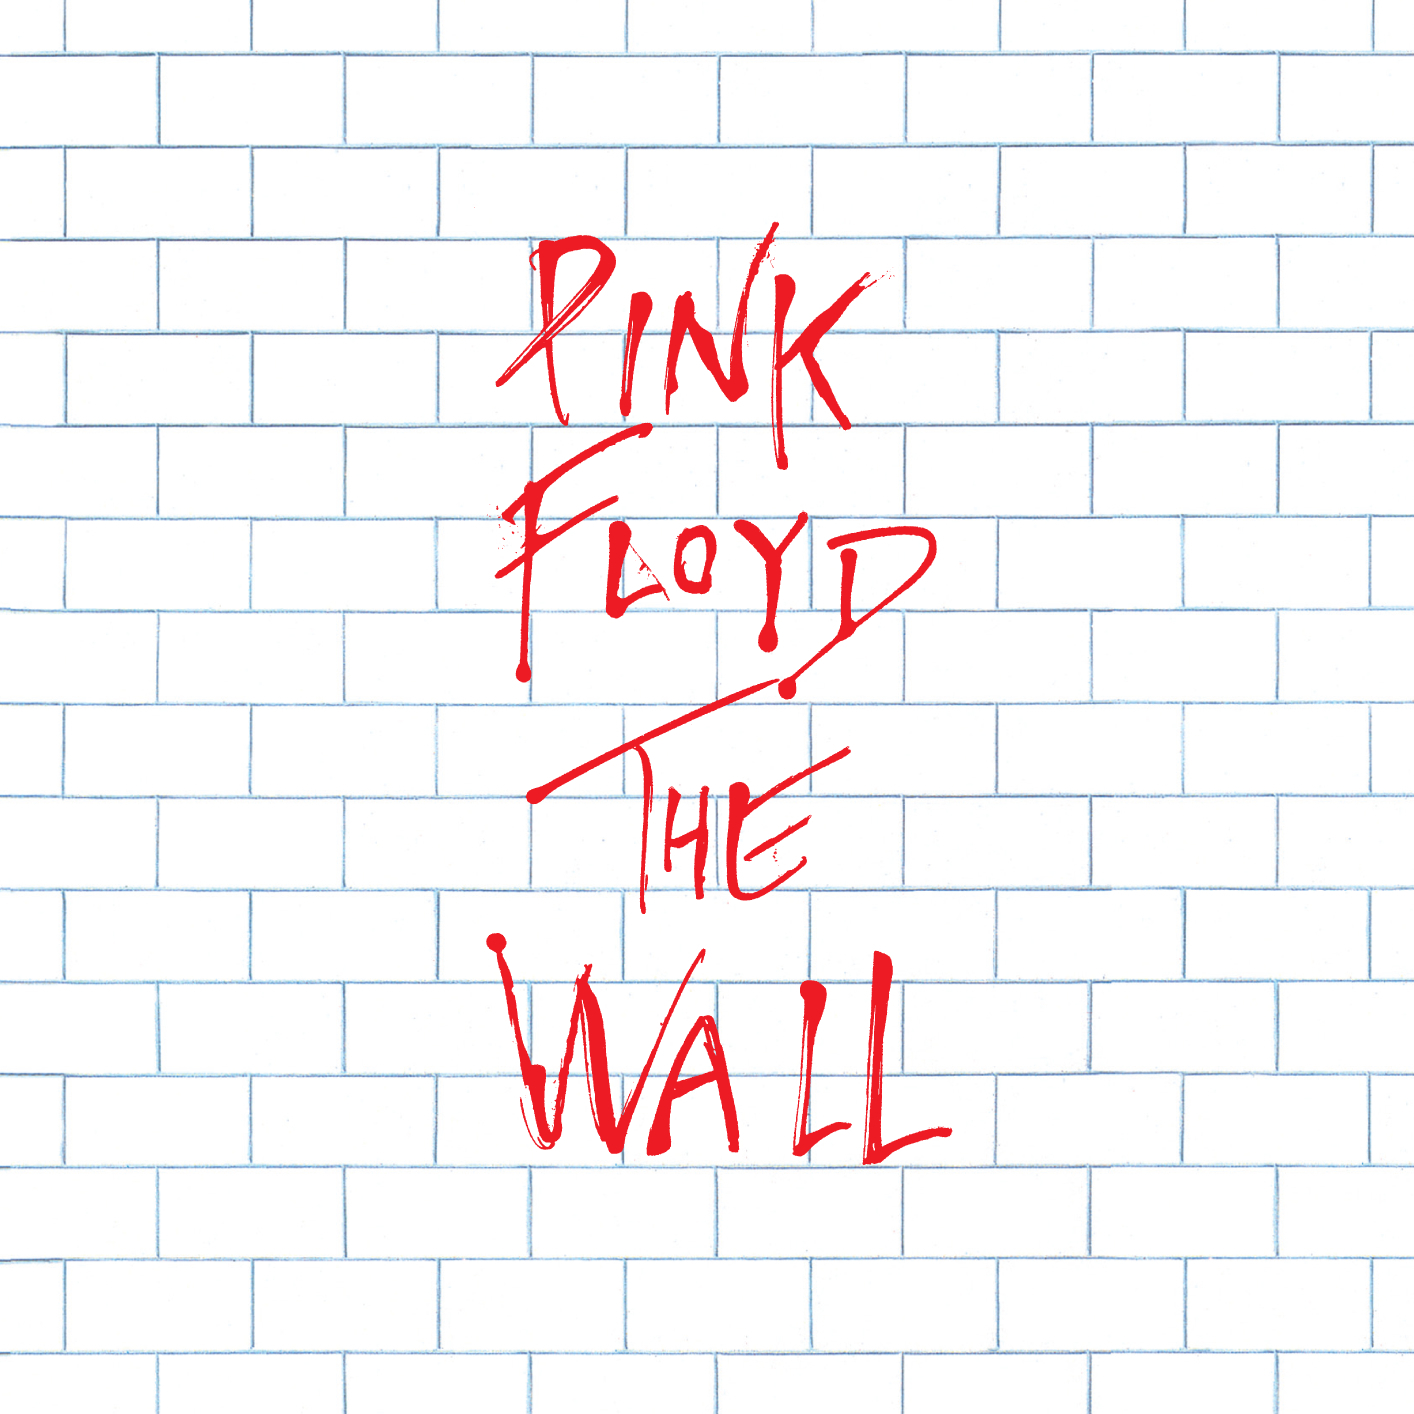 pink floyd the wall album cover analysis